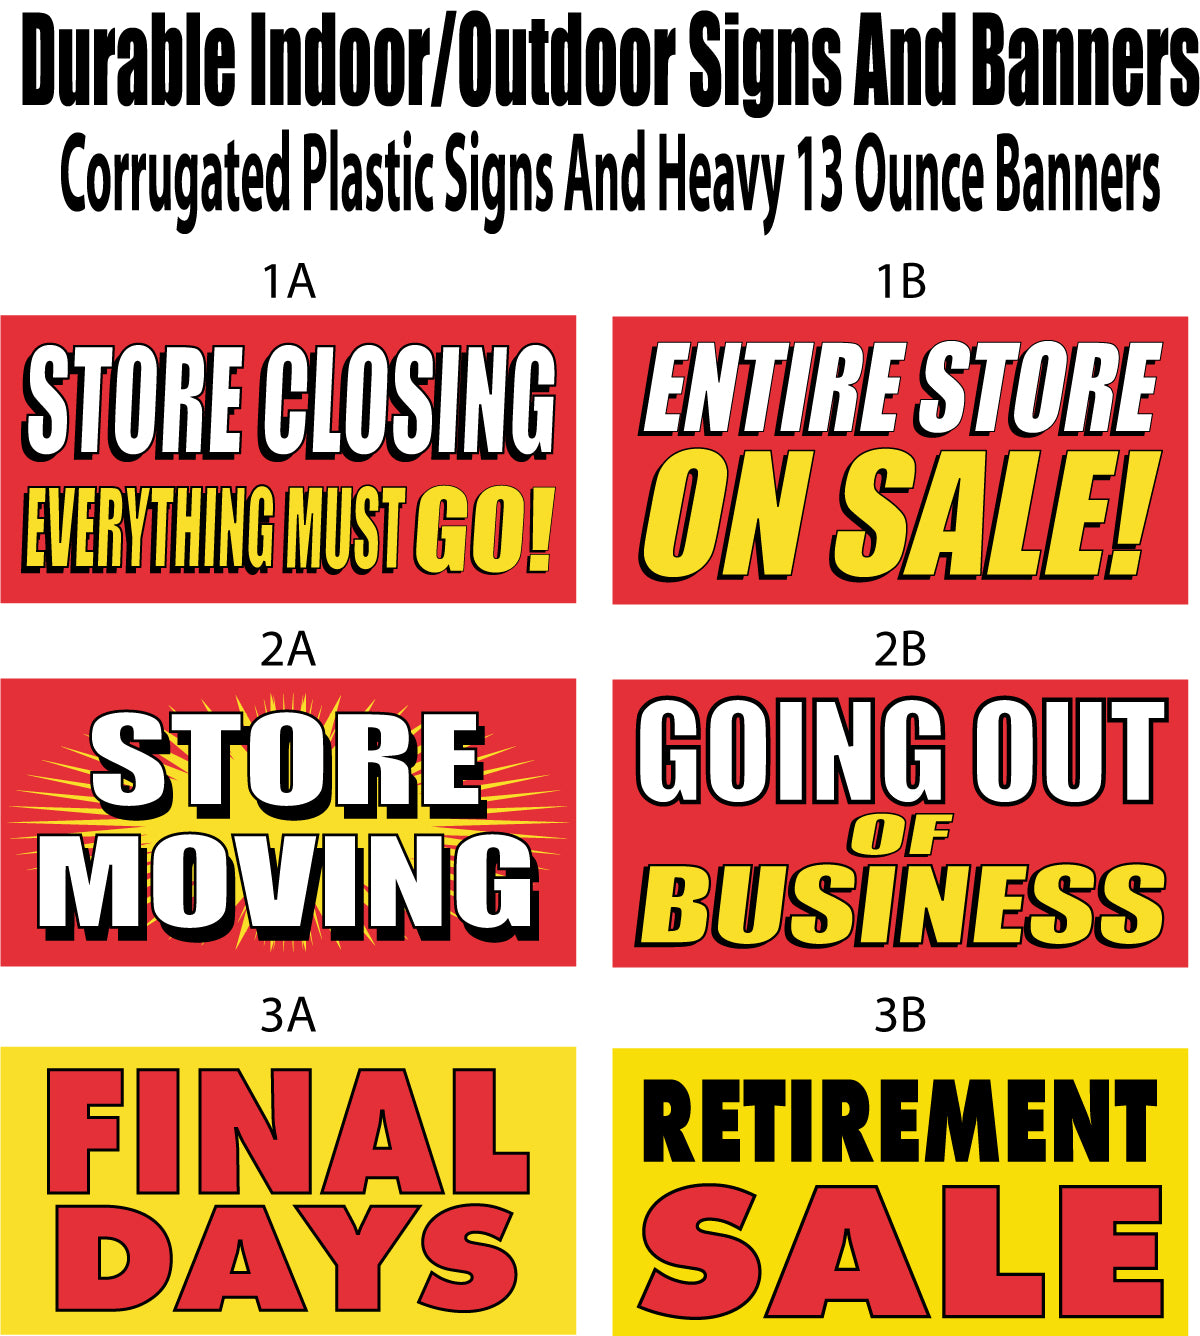 Store Closing, Out Of Business, Final Days